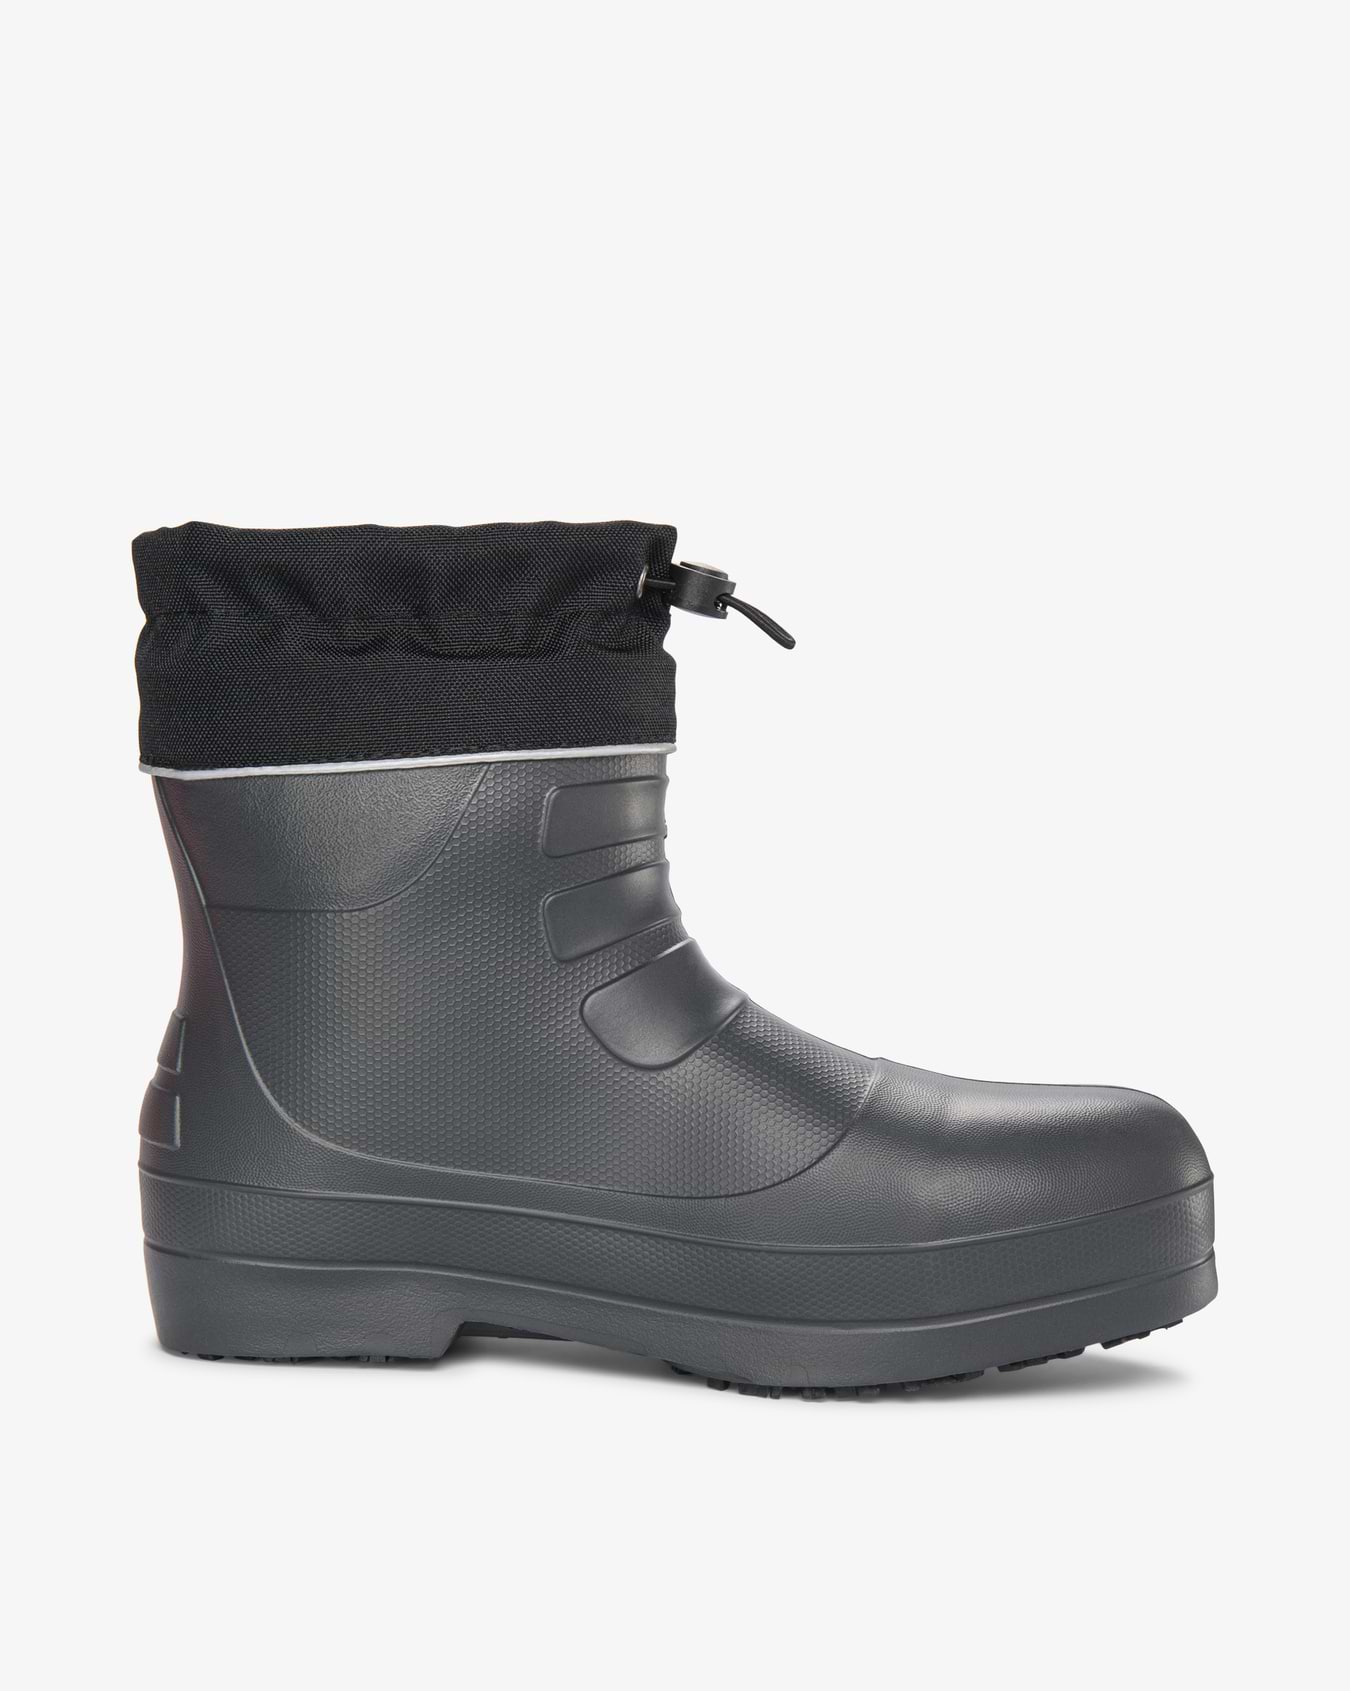 Norse Black/Charcoal Low Boot